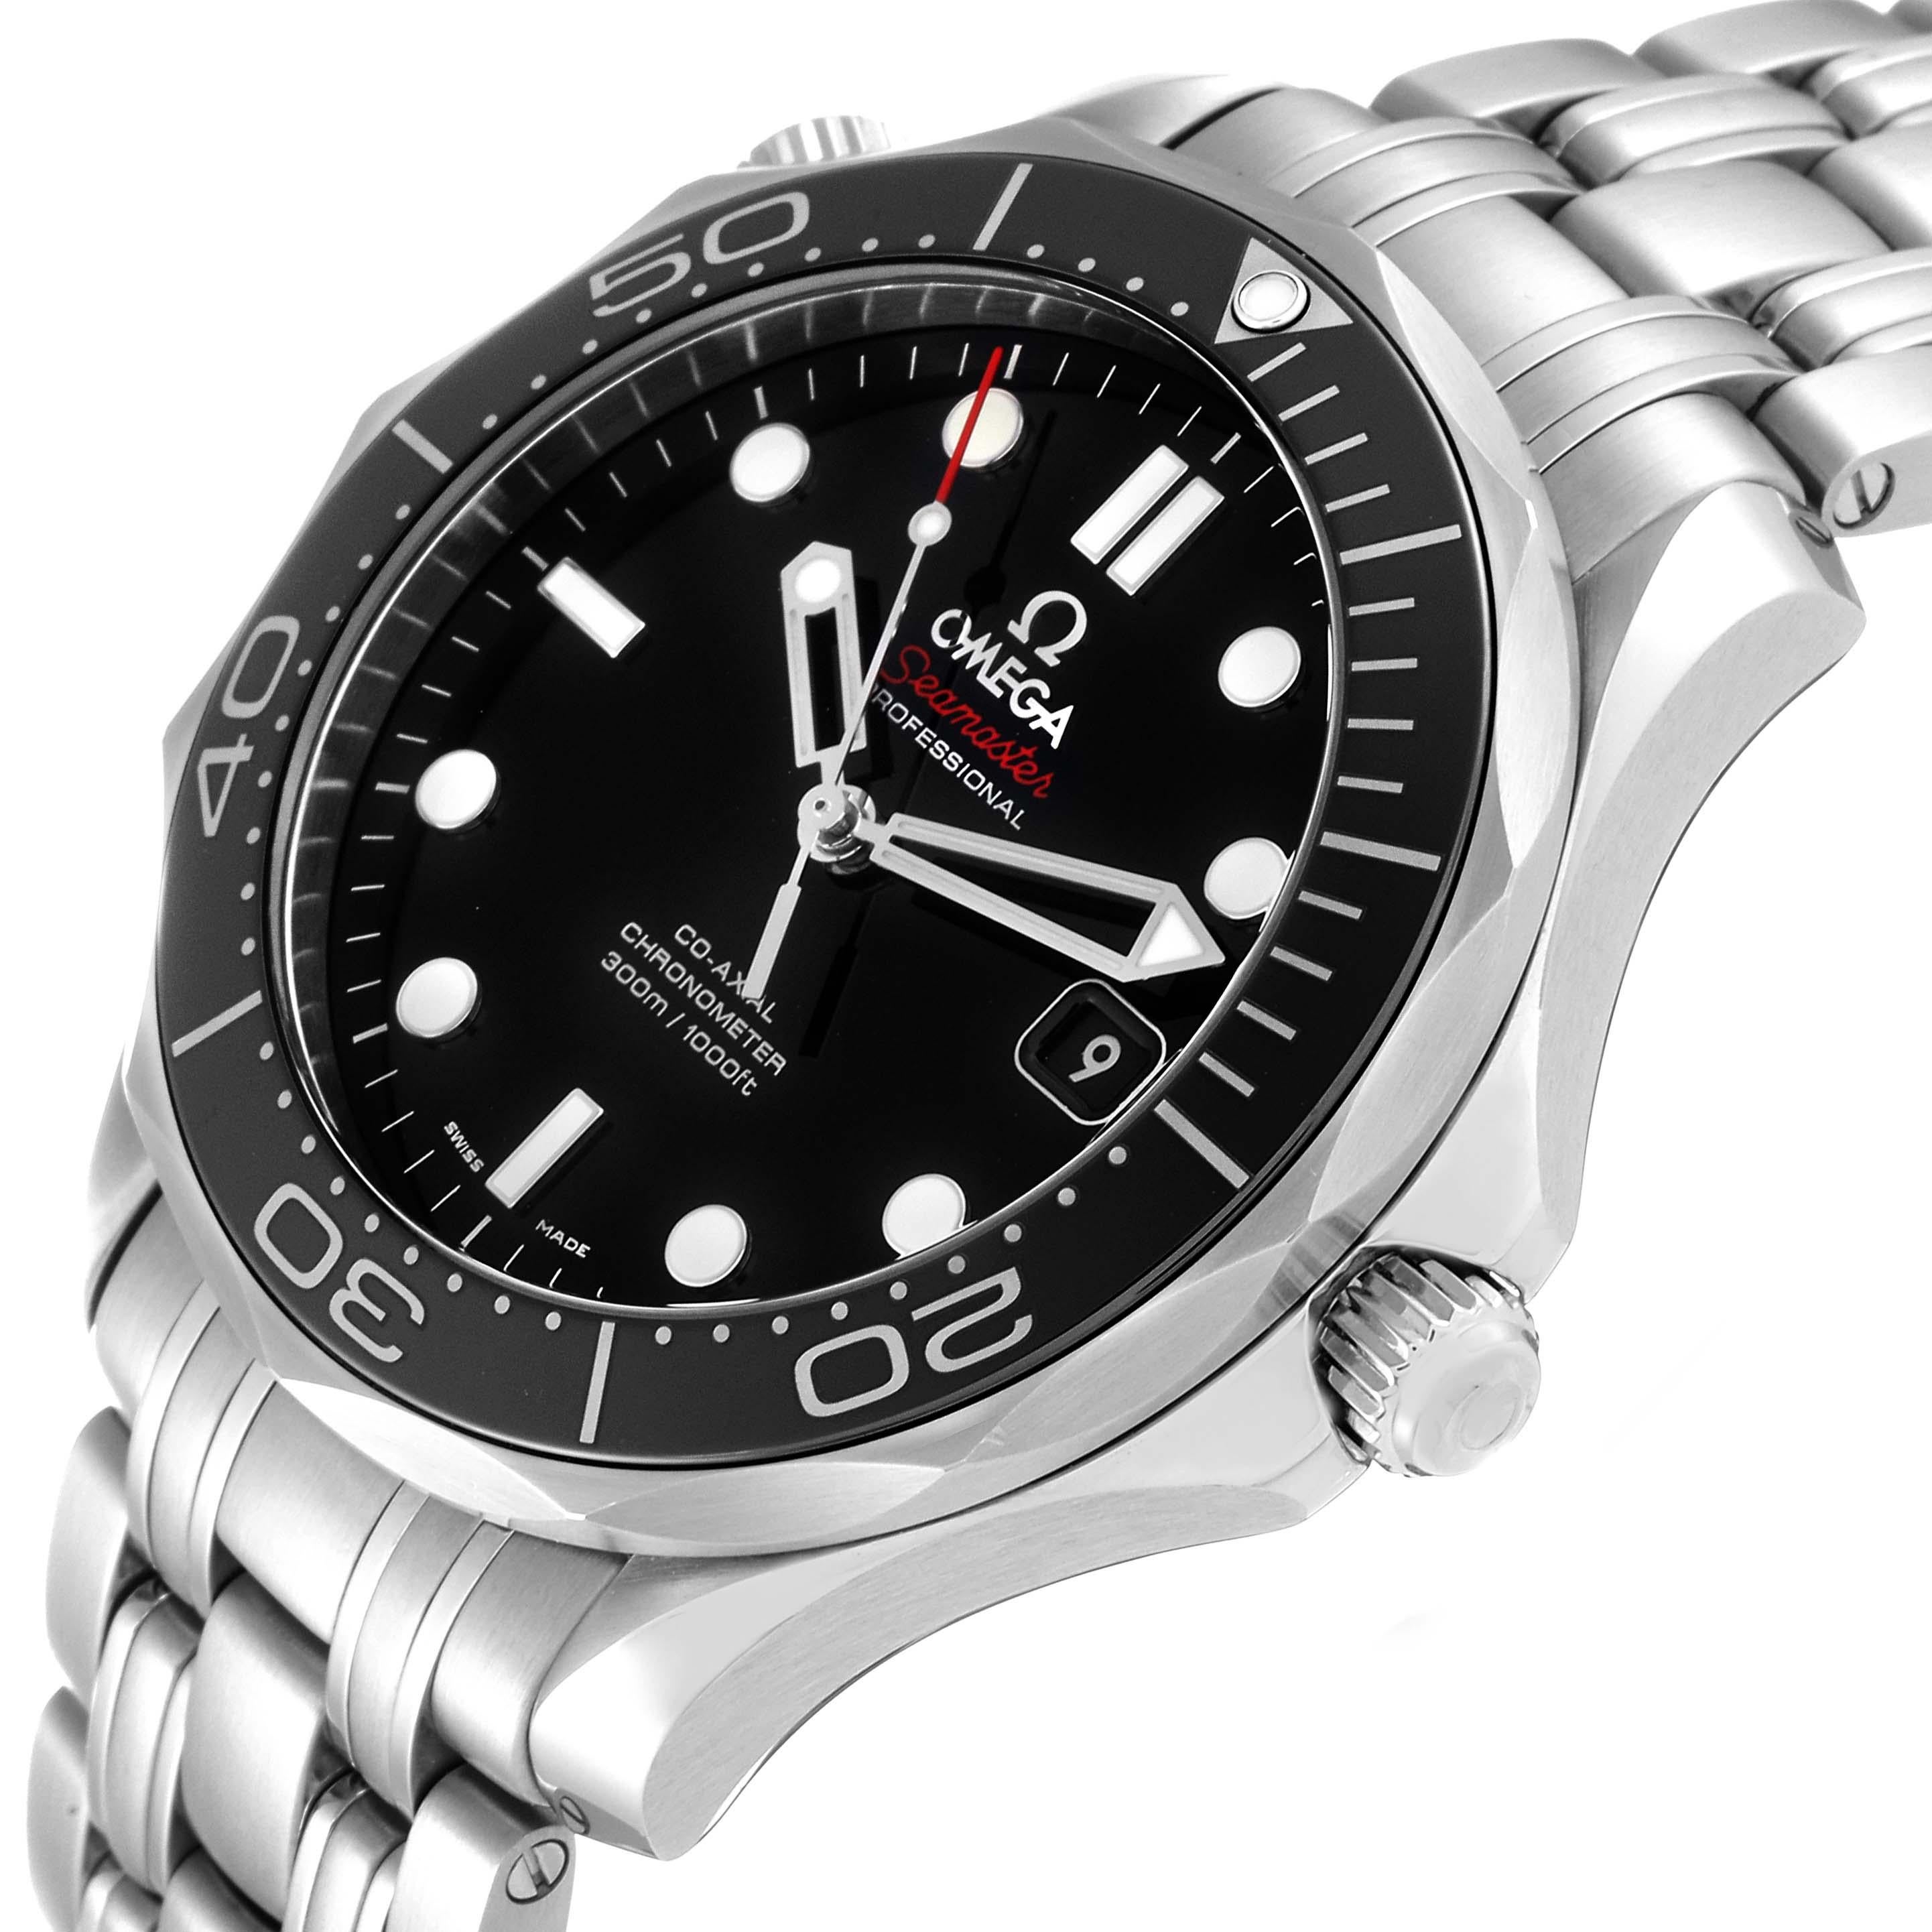 Omega Seamaster Diver 300M Steel Mens Watch 212.30.41.20.01.003 Box Card In Excellent Condition For Sale In Atlanta, GA